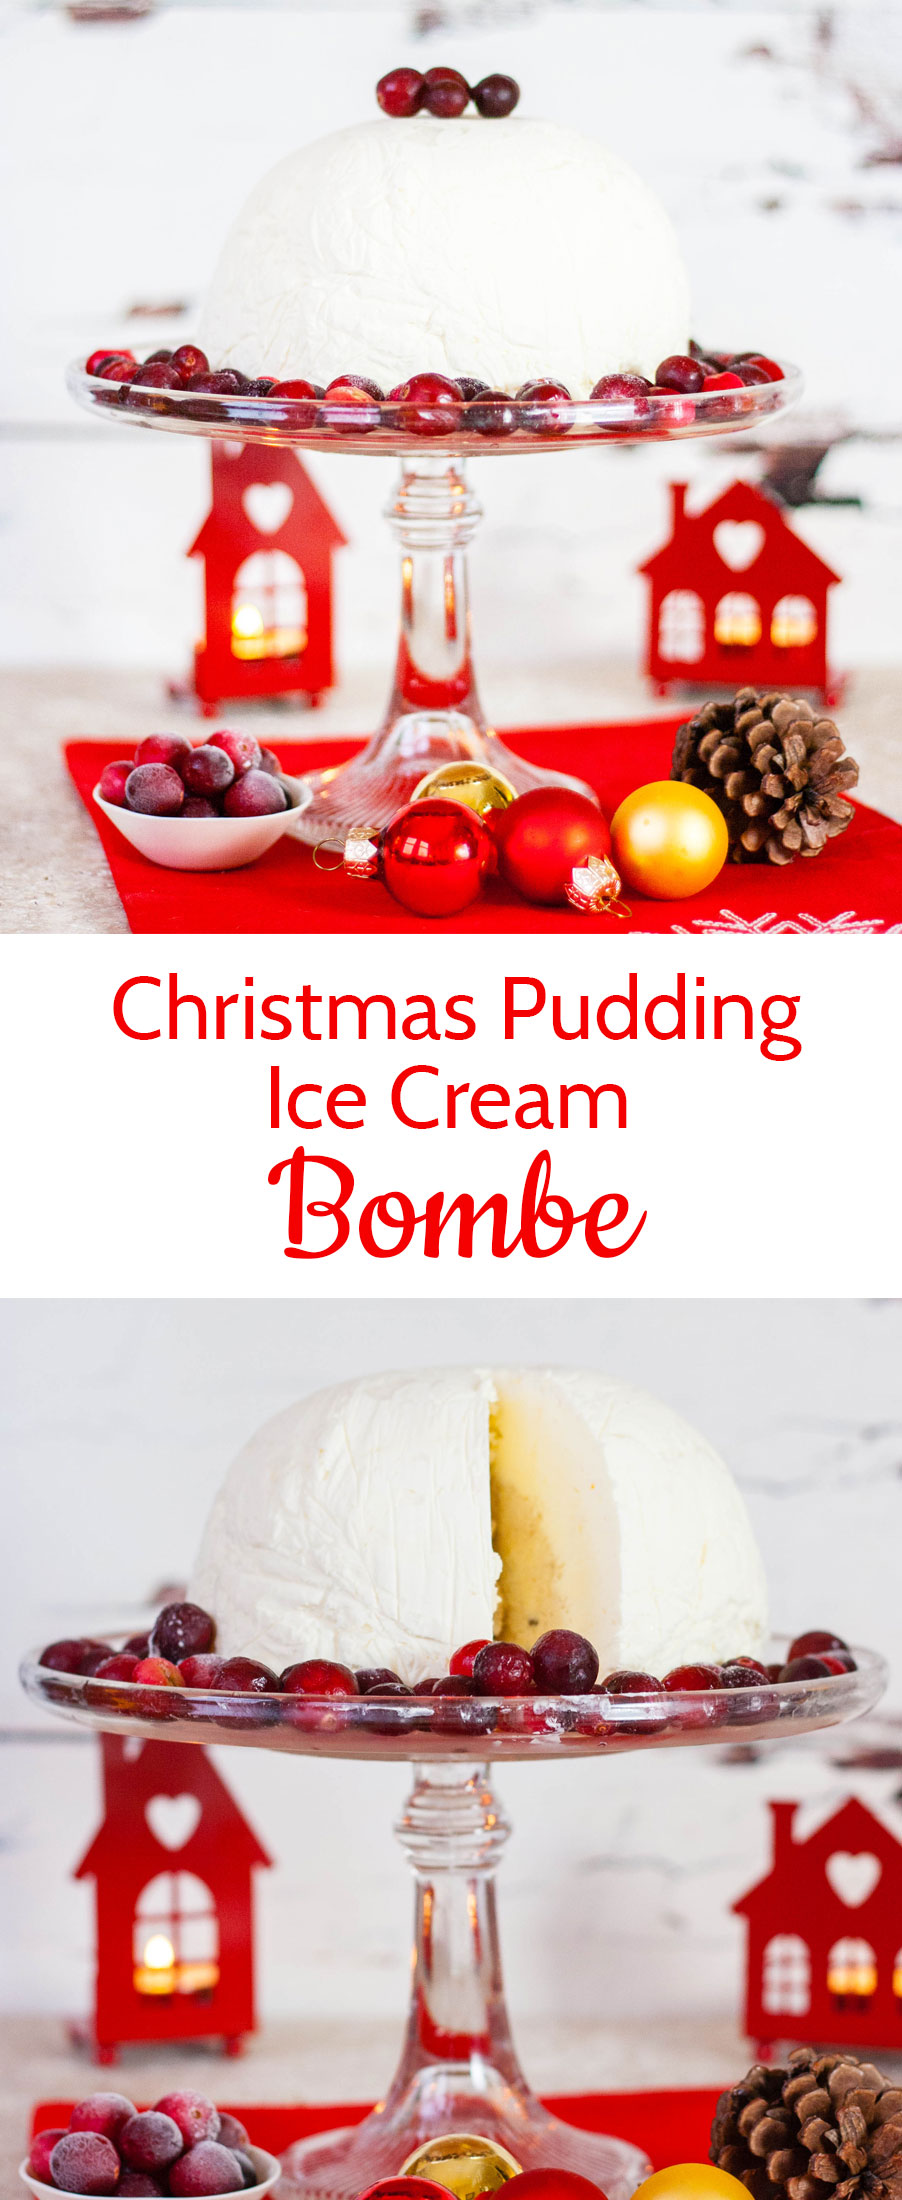 Christmas Pudding Ice Cream Bombe is a twist on a traditional Christmas Pudding and it's great for a warm weather Christmas celebration